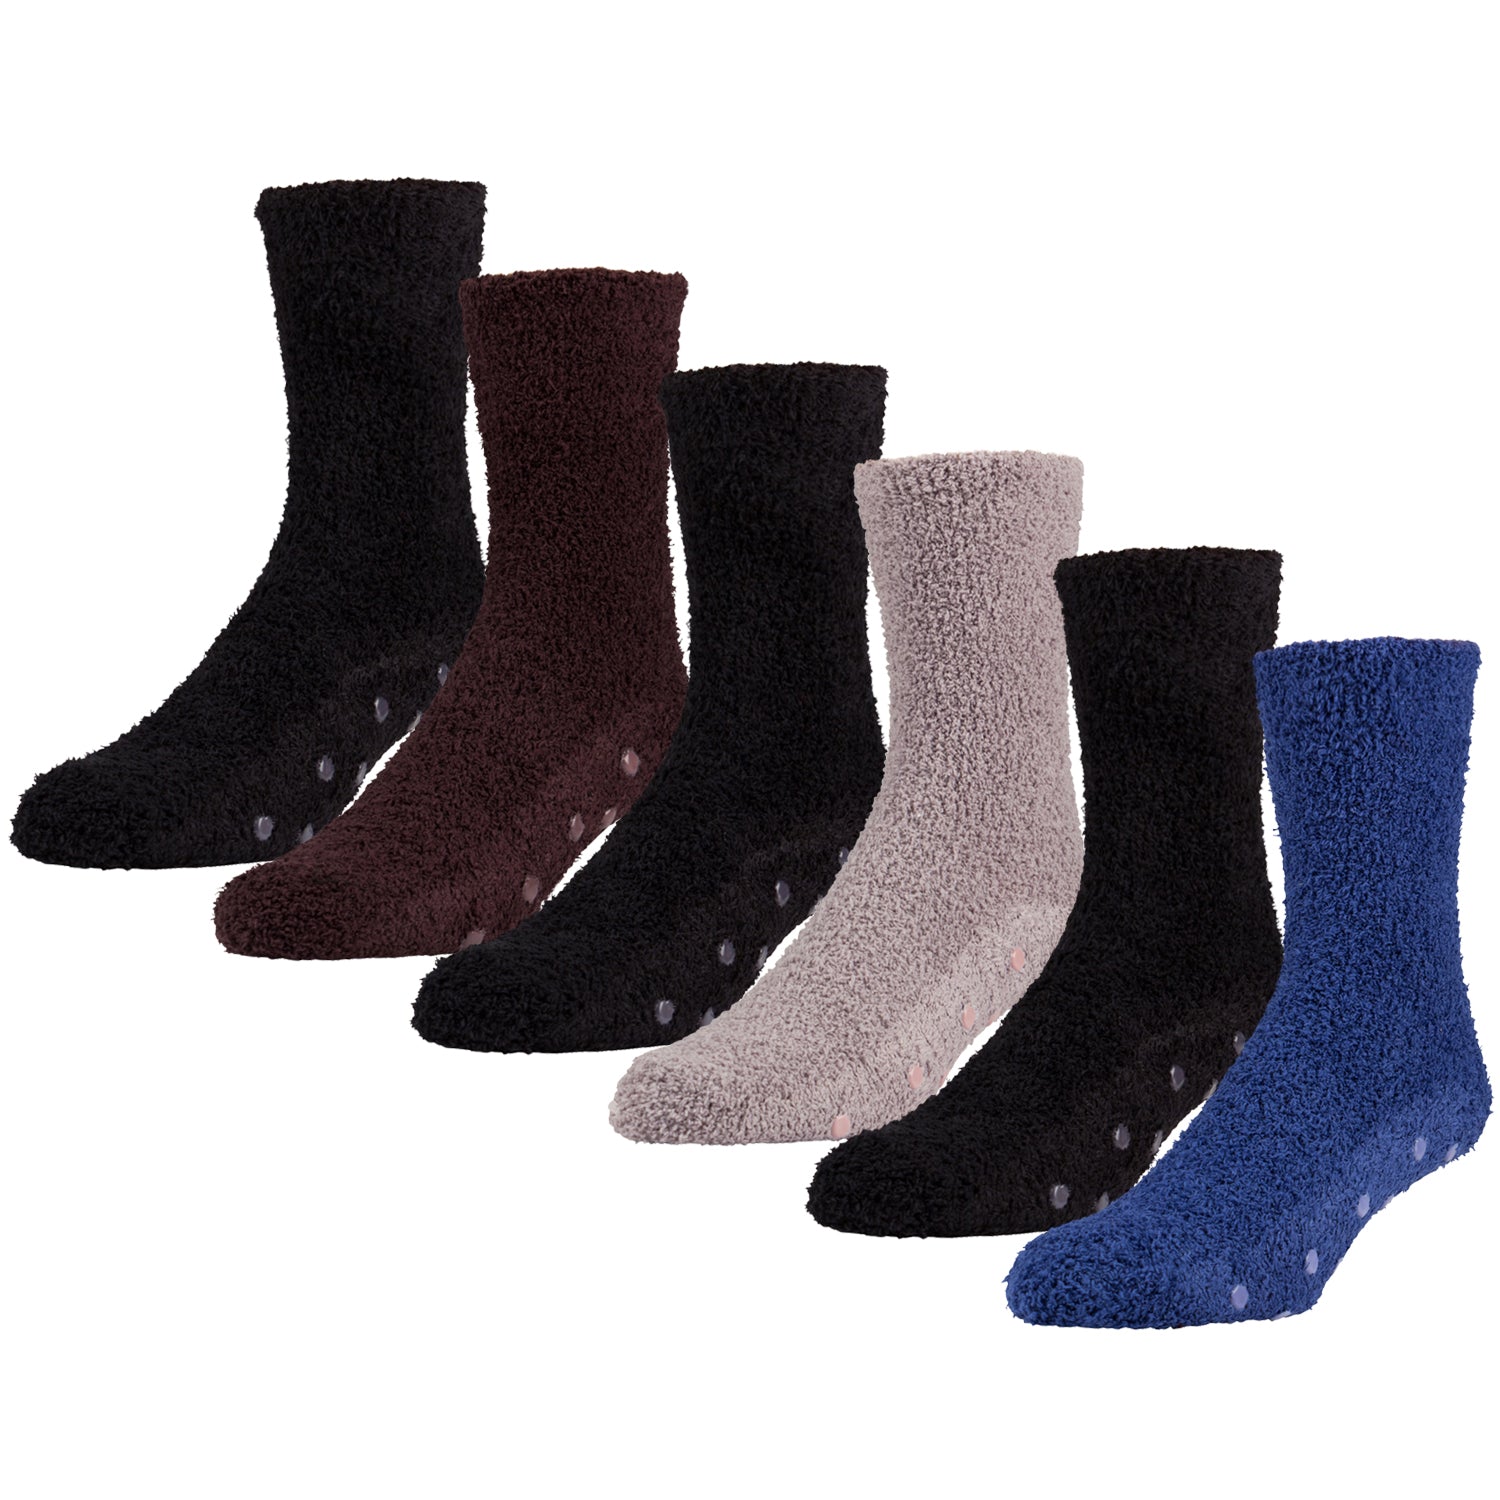 6 pairs of Fuzzy Non Skid Soft Warm Crew Socks with Dot Gripper, Size 10-13